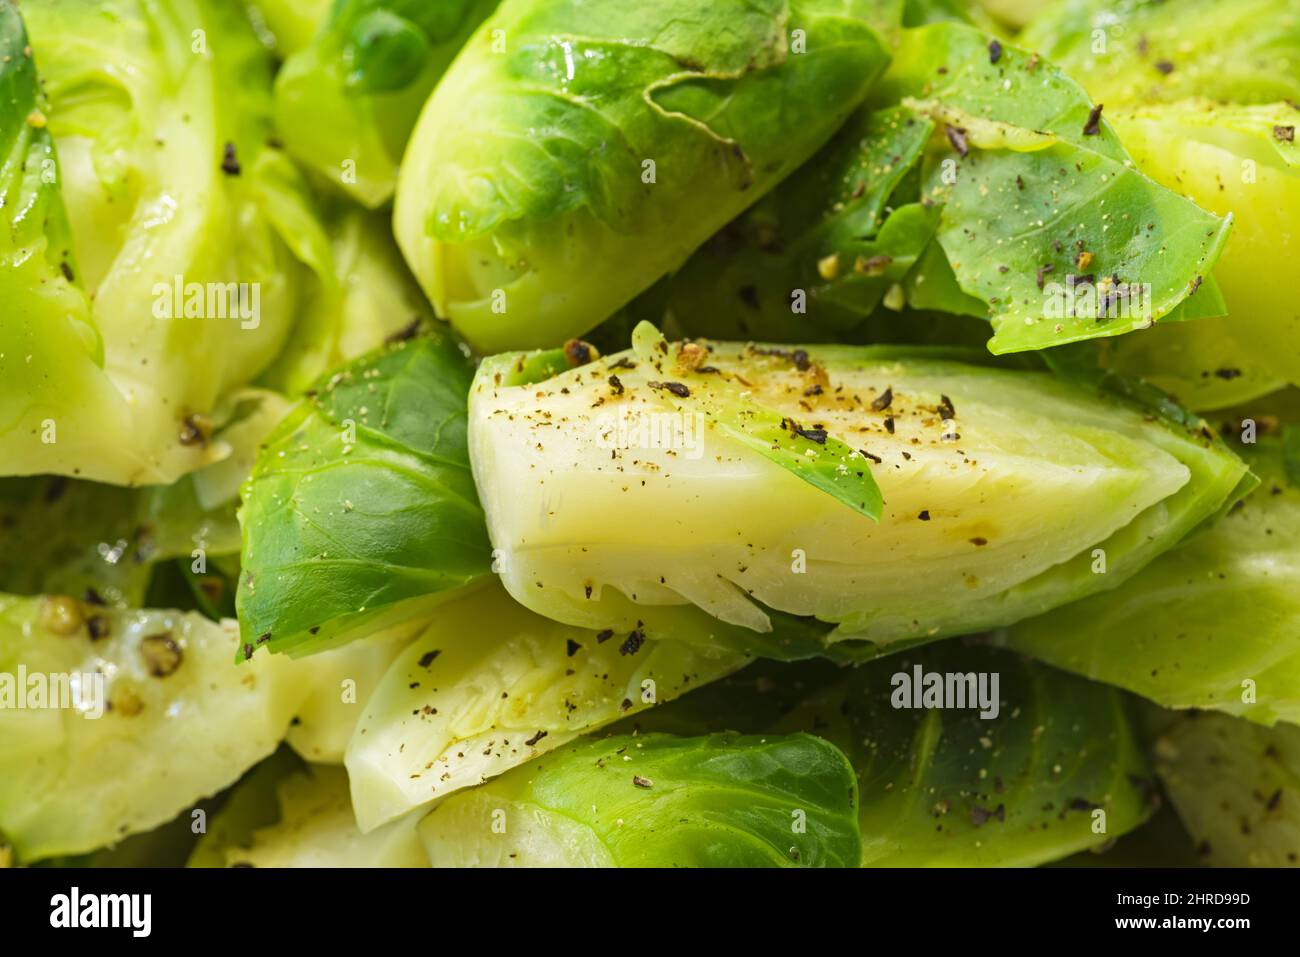 detail of cut and cooked brussels sprouts with herbs and spices Stock Photo